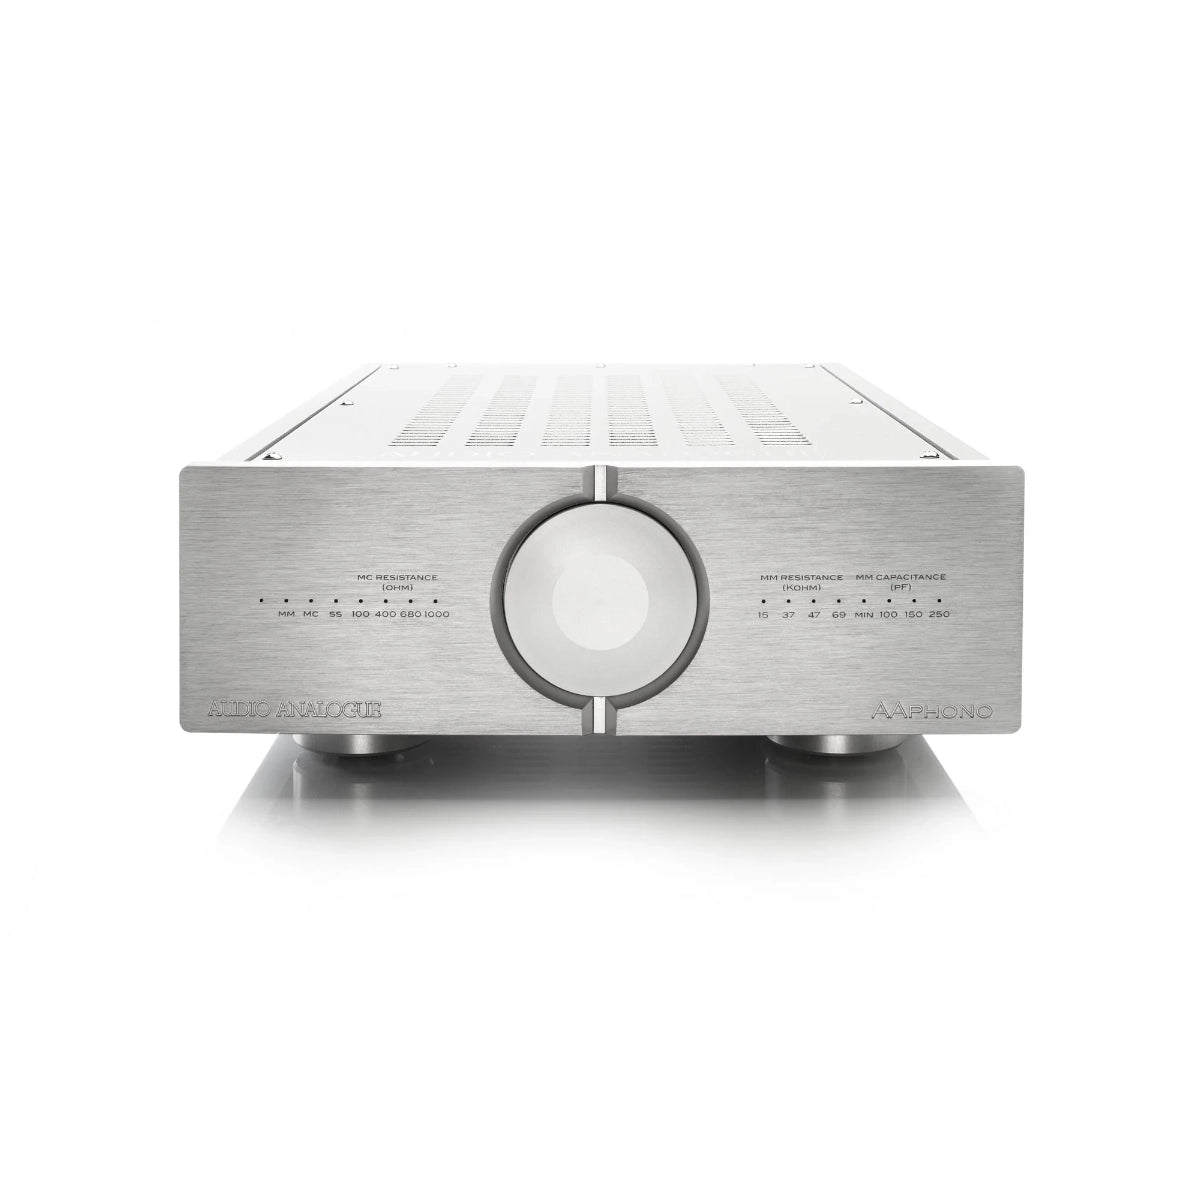 An image of Audio Analogue's AAphono preamplifier in silver finish.